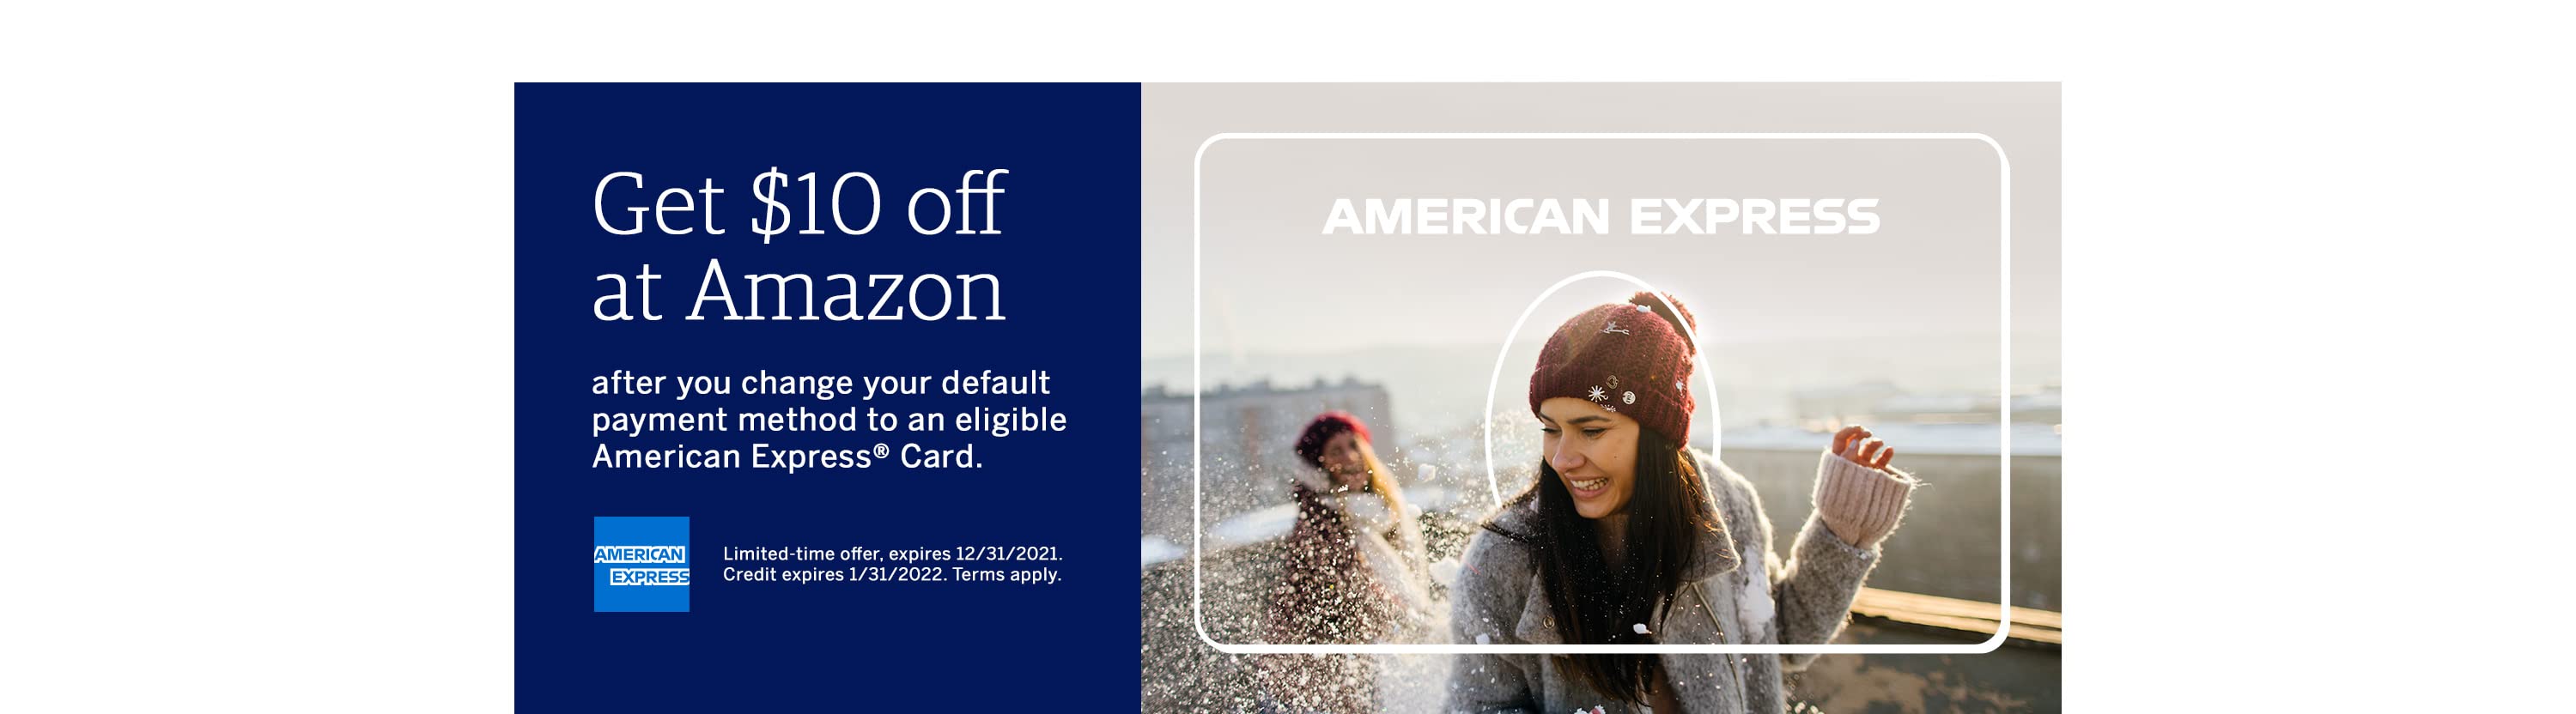 Get $10 off at Amazon Using AMEX Card as Default Payment YMMV